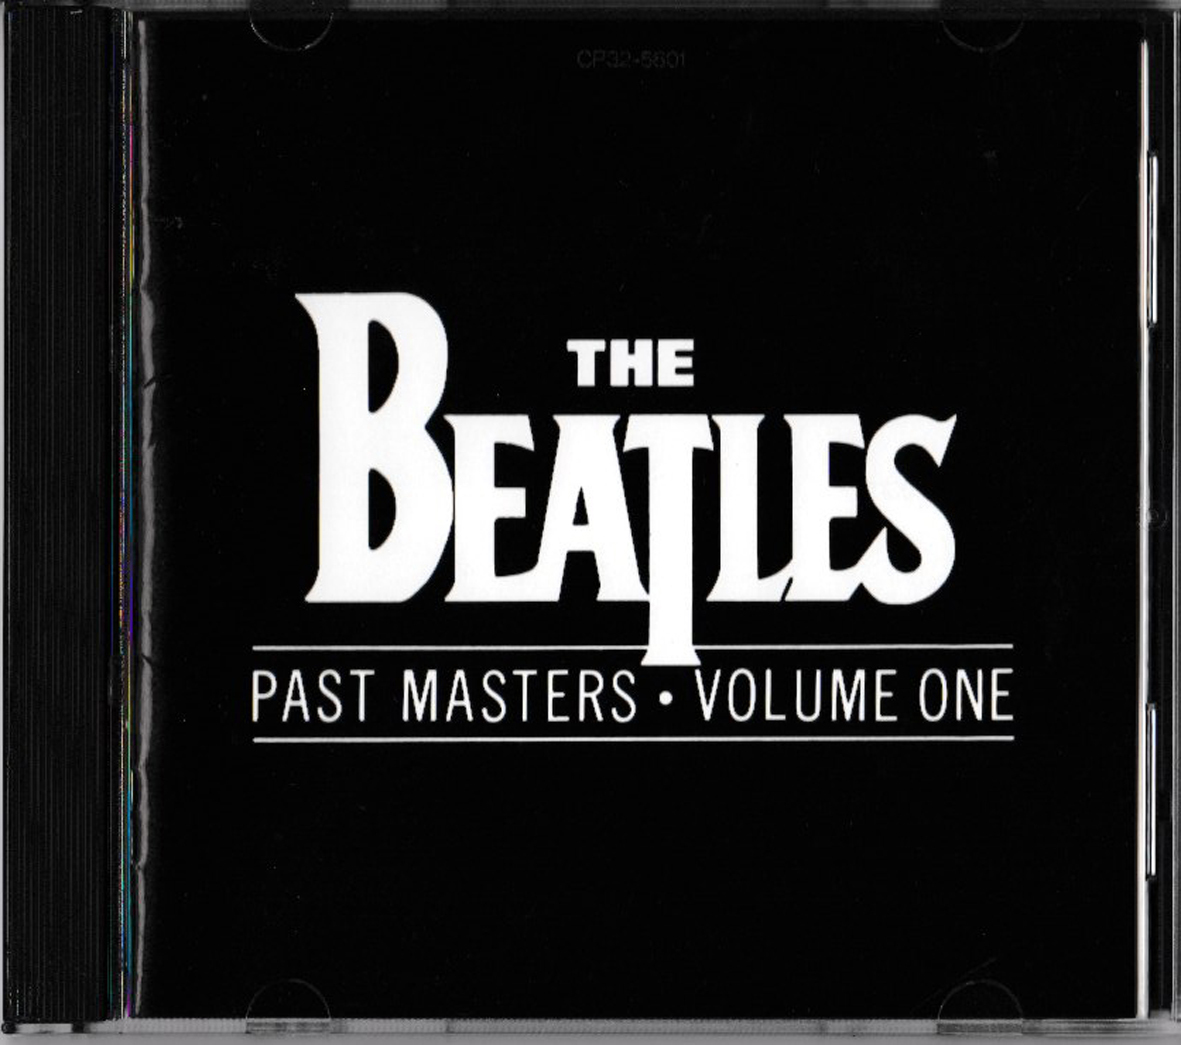 ★THE BEATLES ビートルズ｜PAST MASTERS・VOLUME ONE パスト・マスターズ Vol.1｜LOVE ME DO/SHE LOVES YOU｜CP32-5601｜1988/03/06_画像1